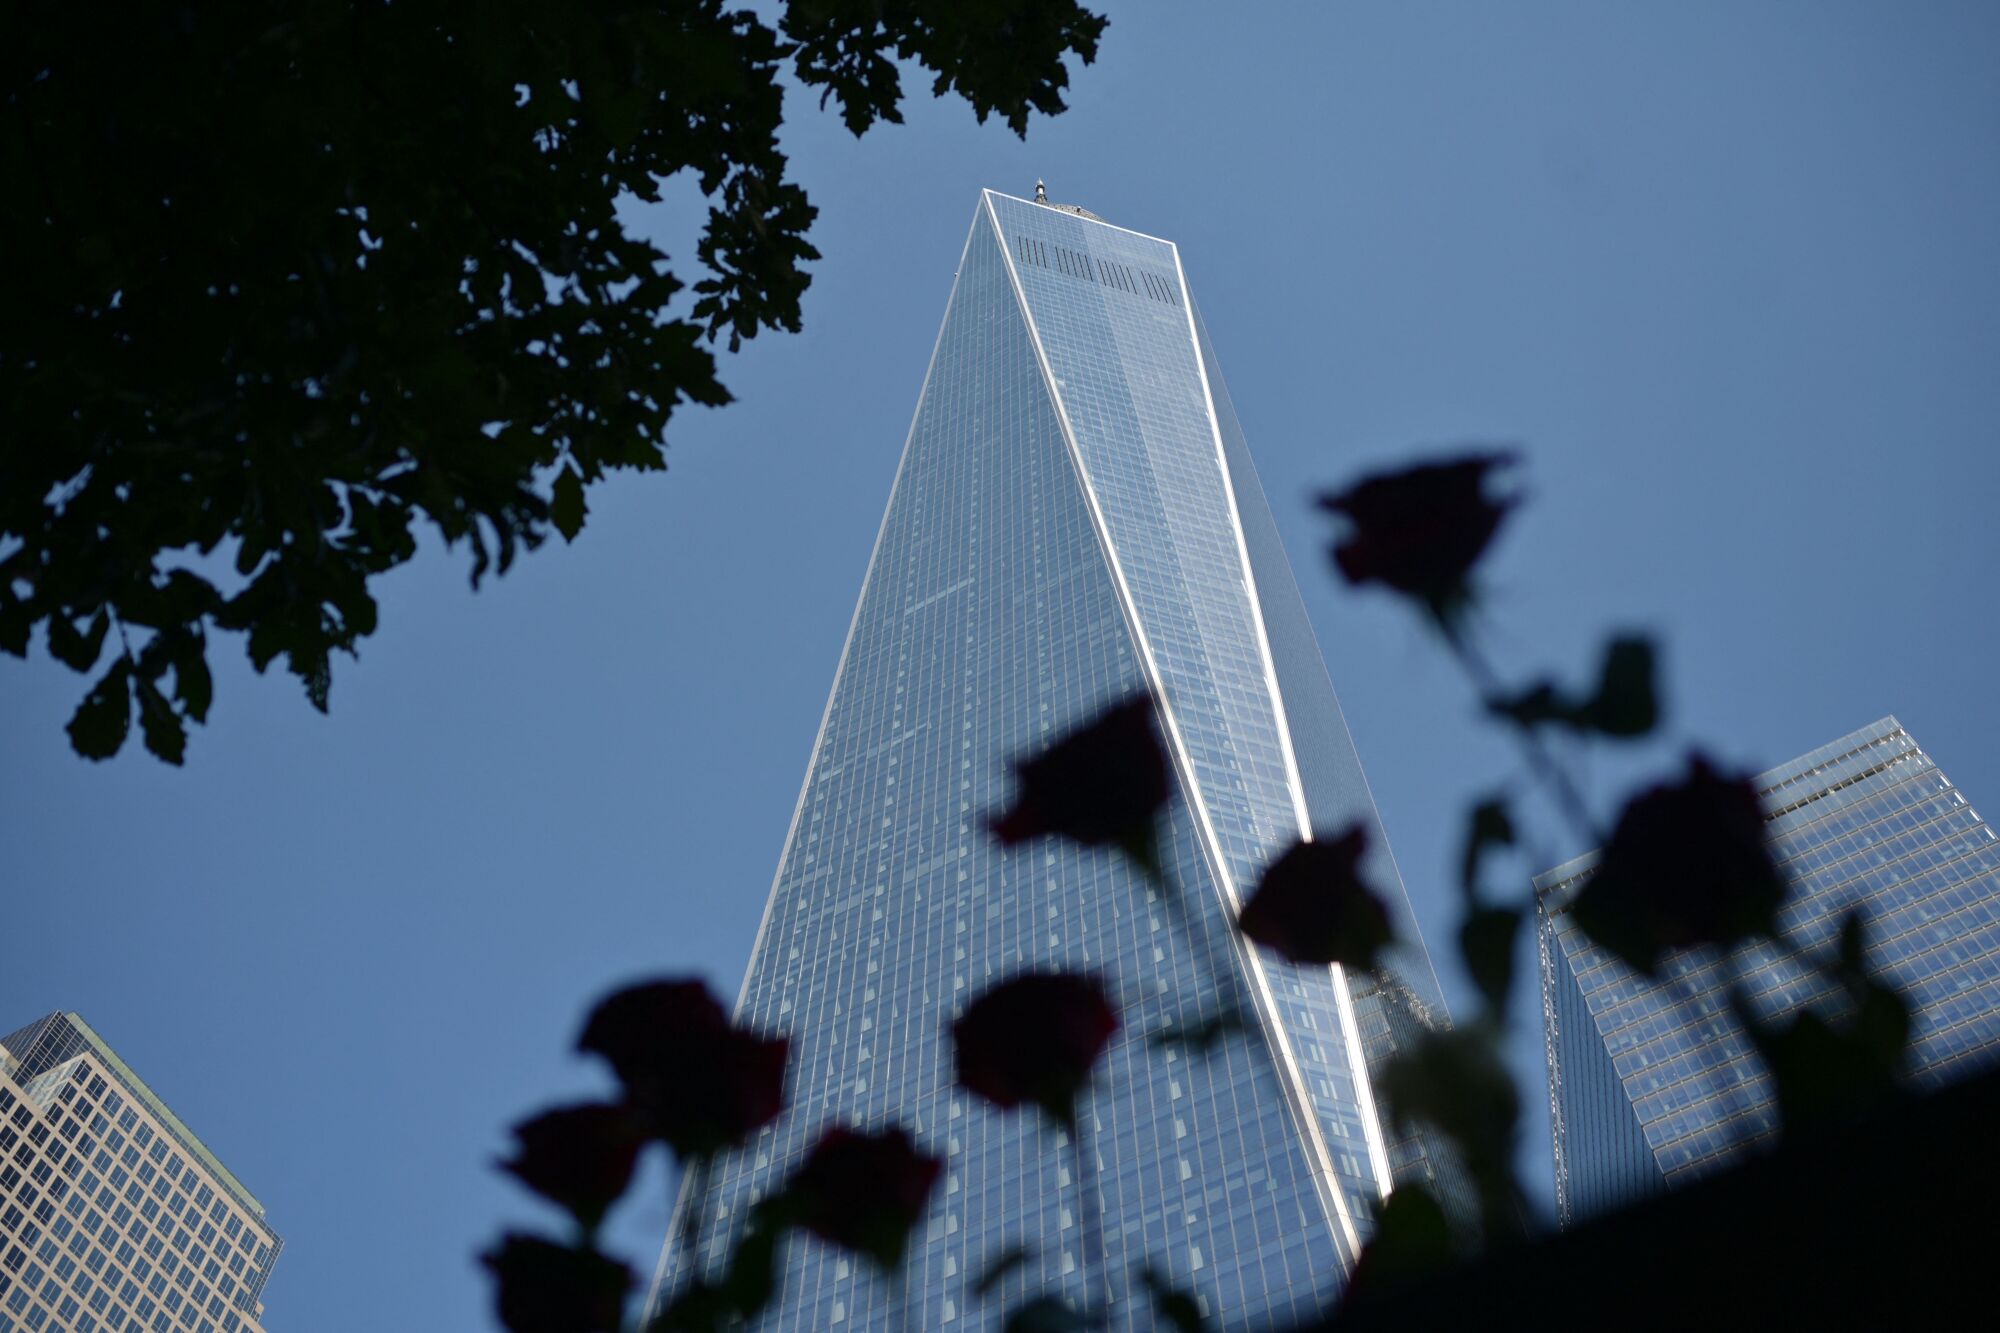 Freedom Tower is seen against a blue sky and amid other buildings